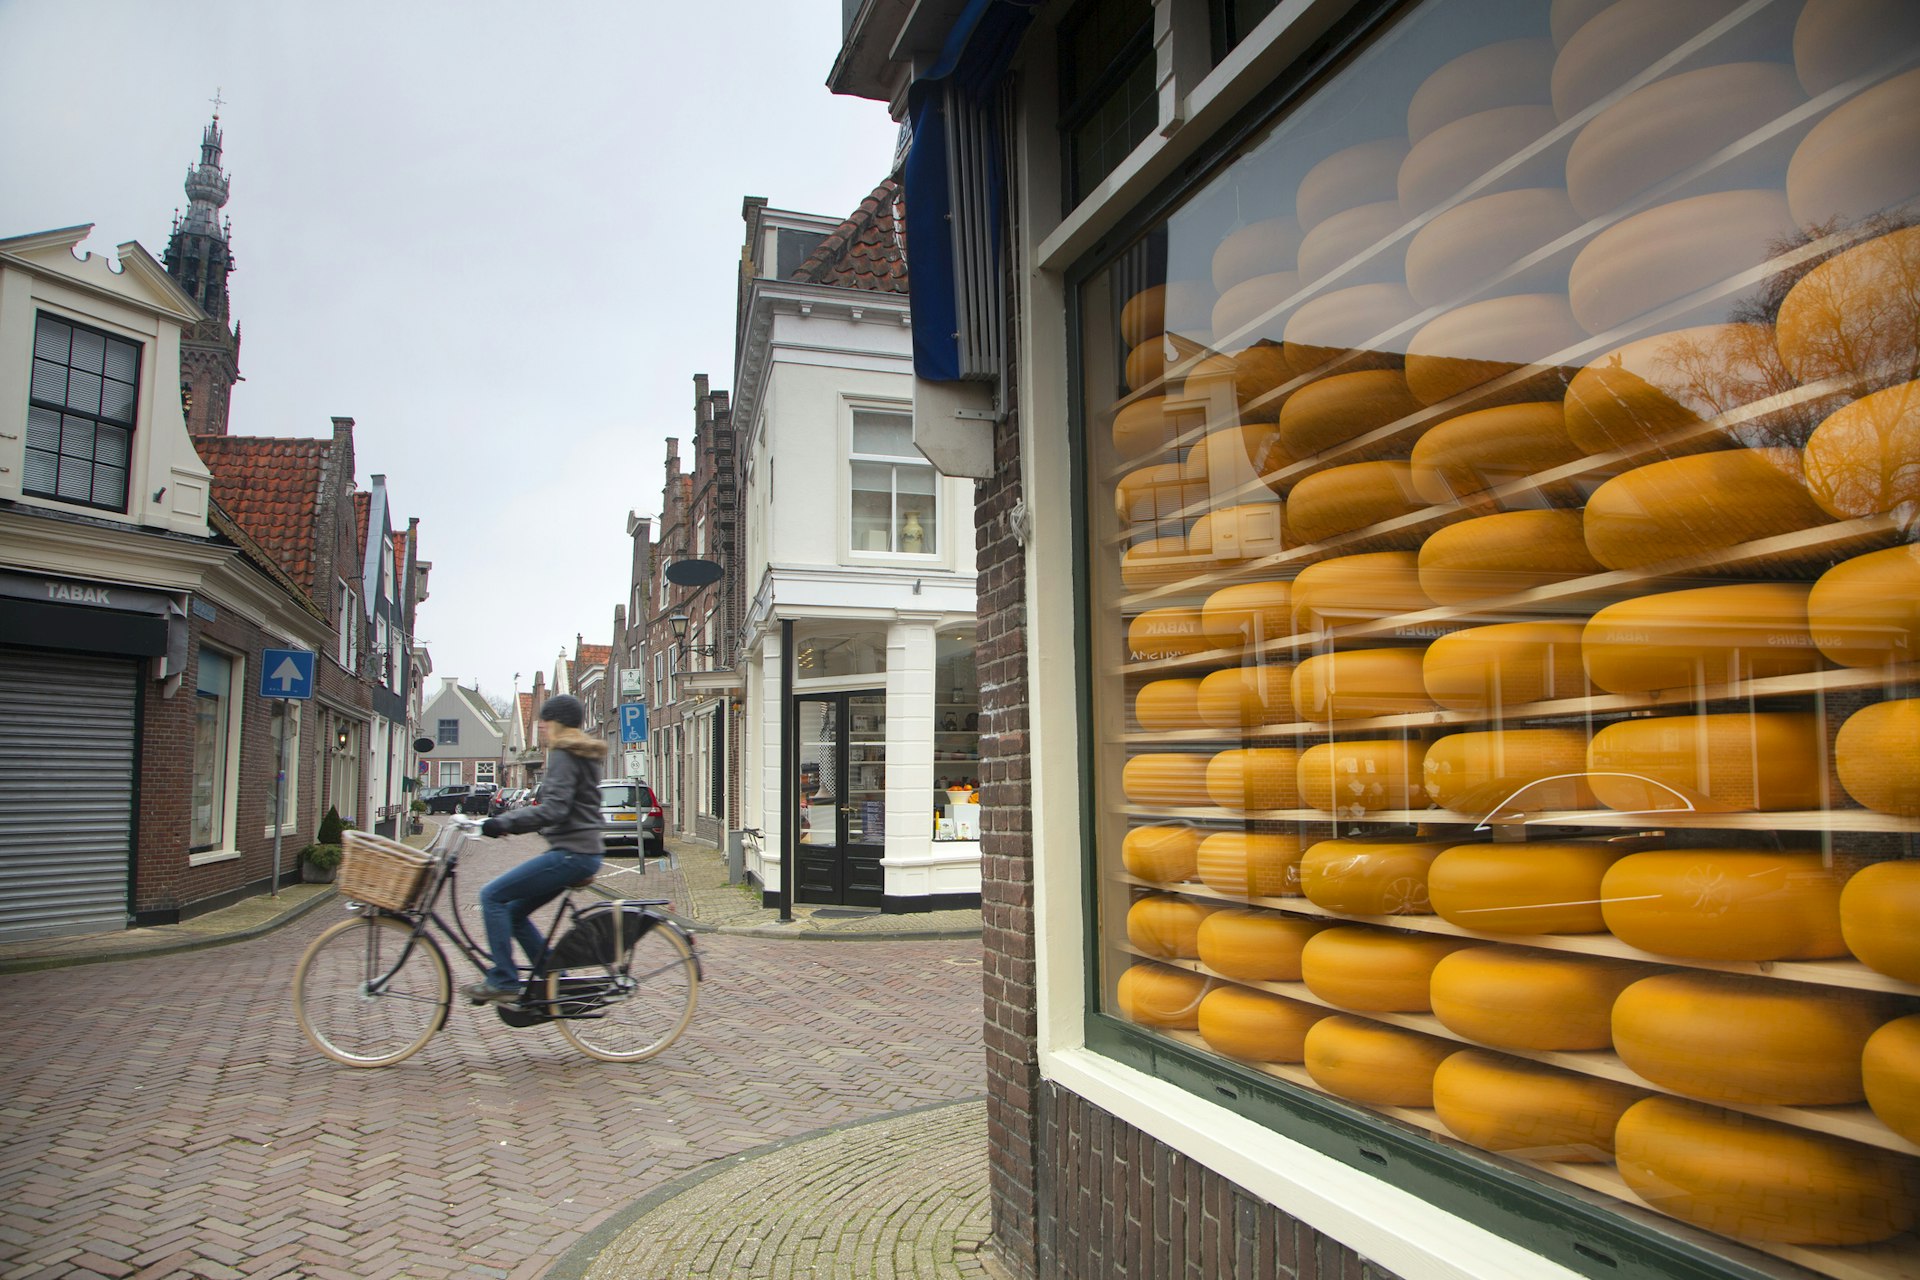 Netherlands, Edam town, female , young lady on bicycle riding near shops. on right of image a cheese shop display.